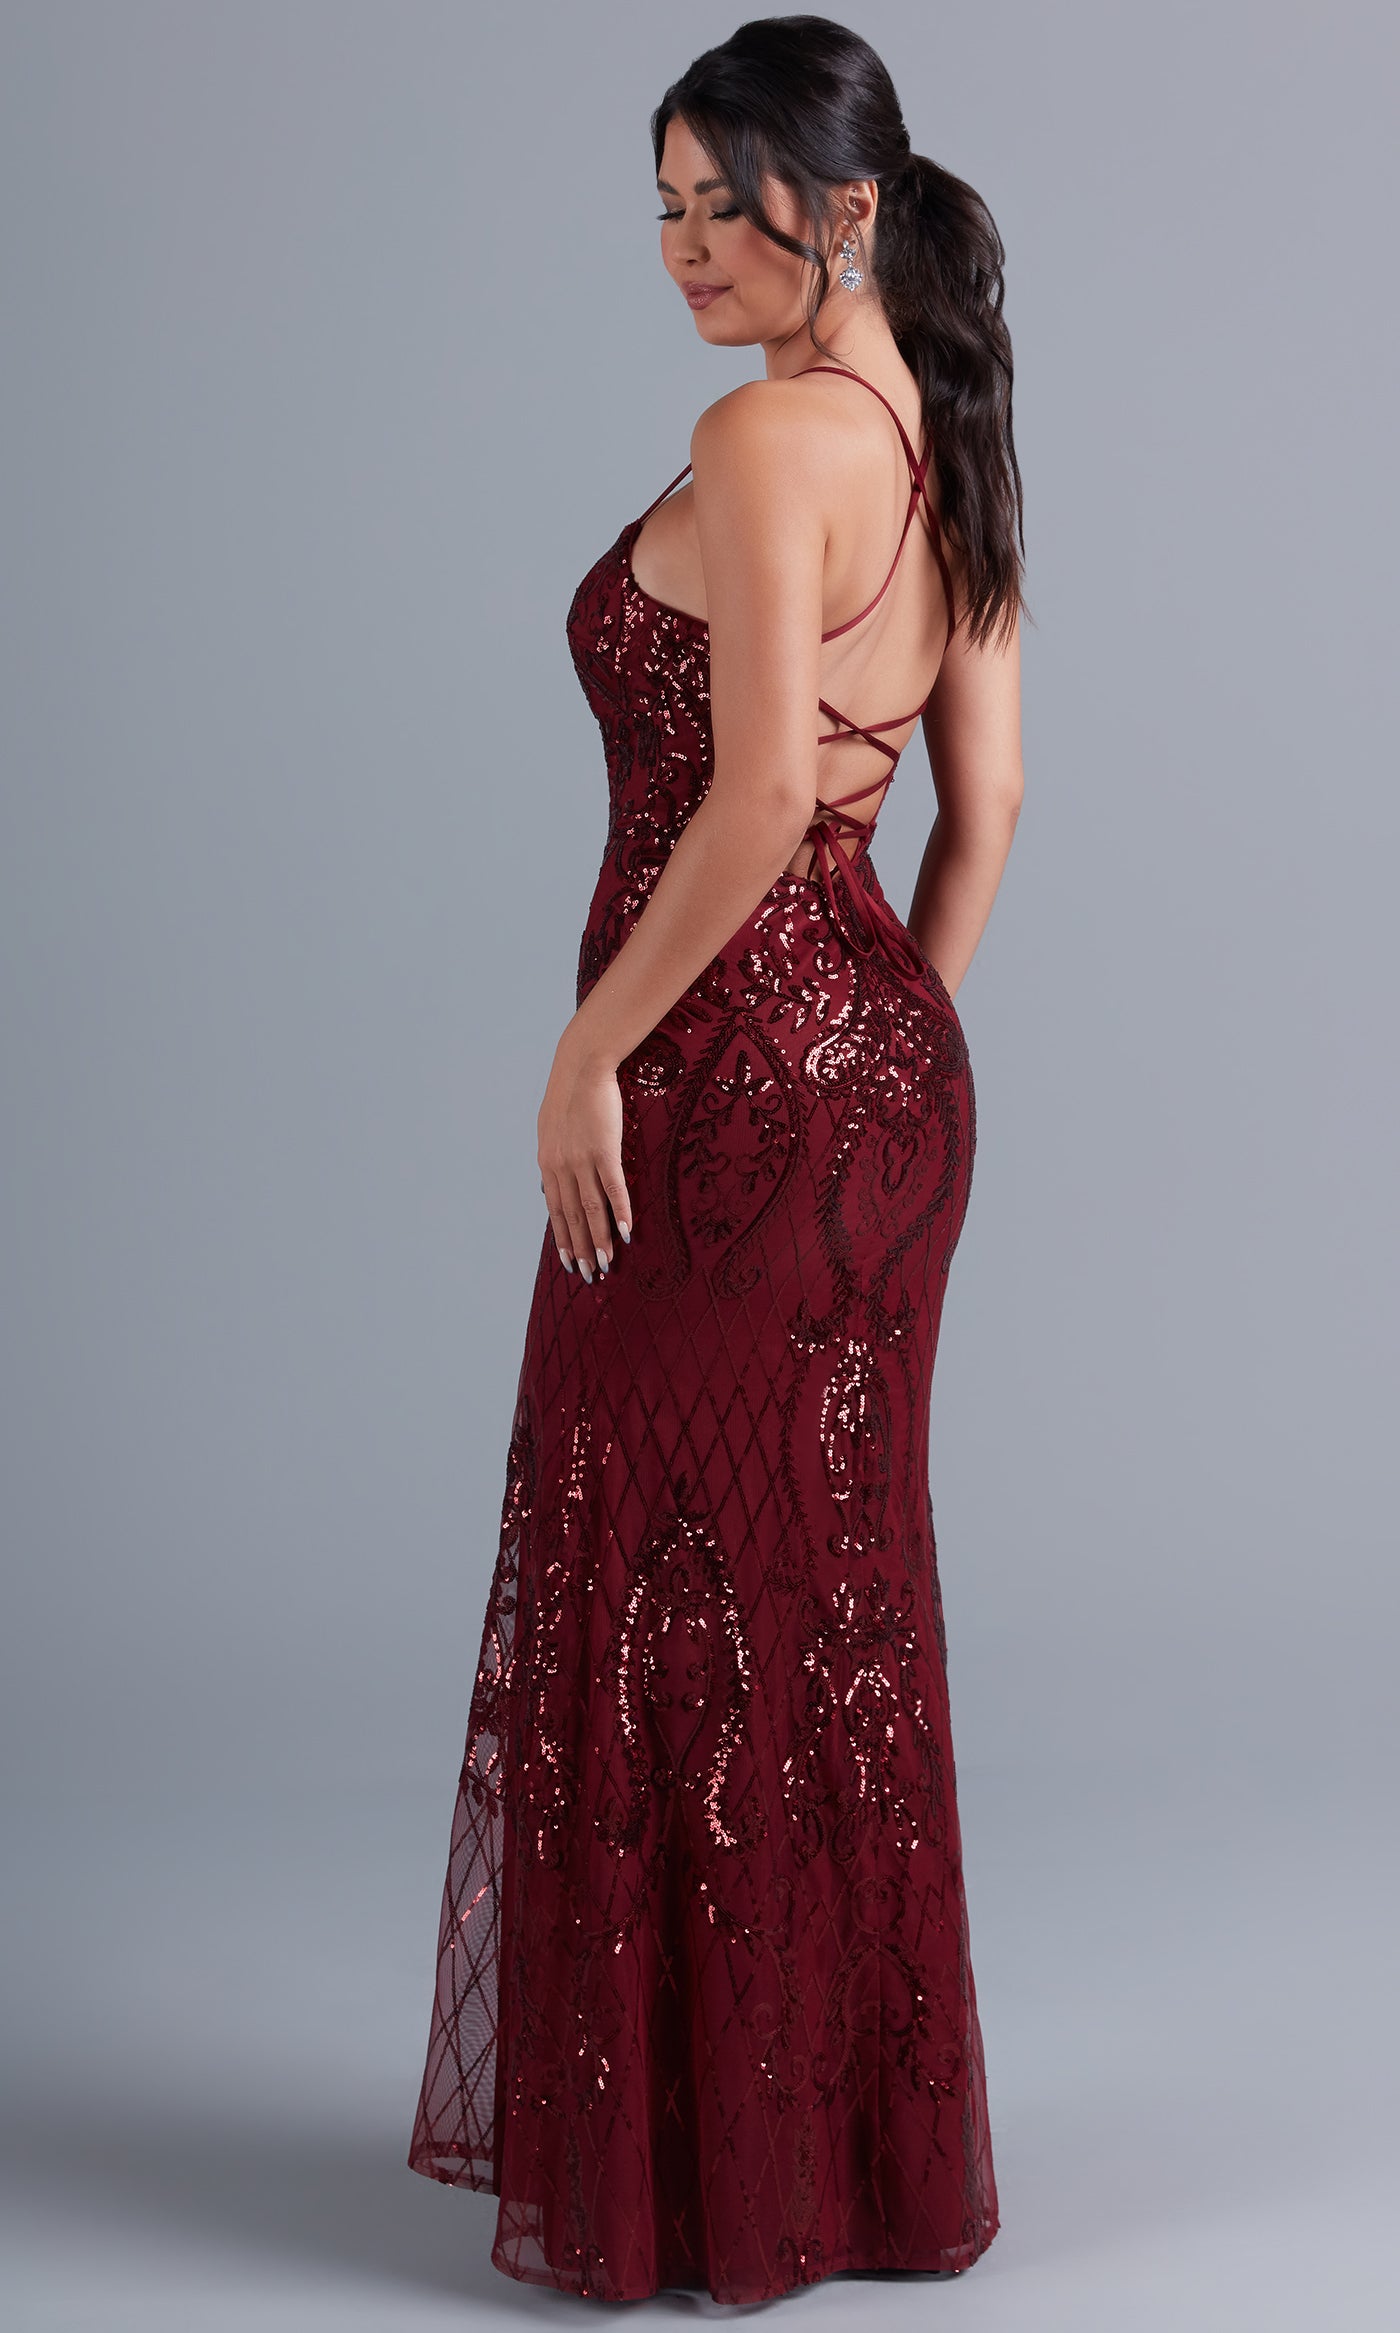  Sequin-Print Long Formal Dress with Statement Back